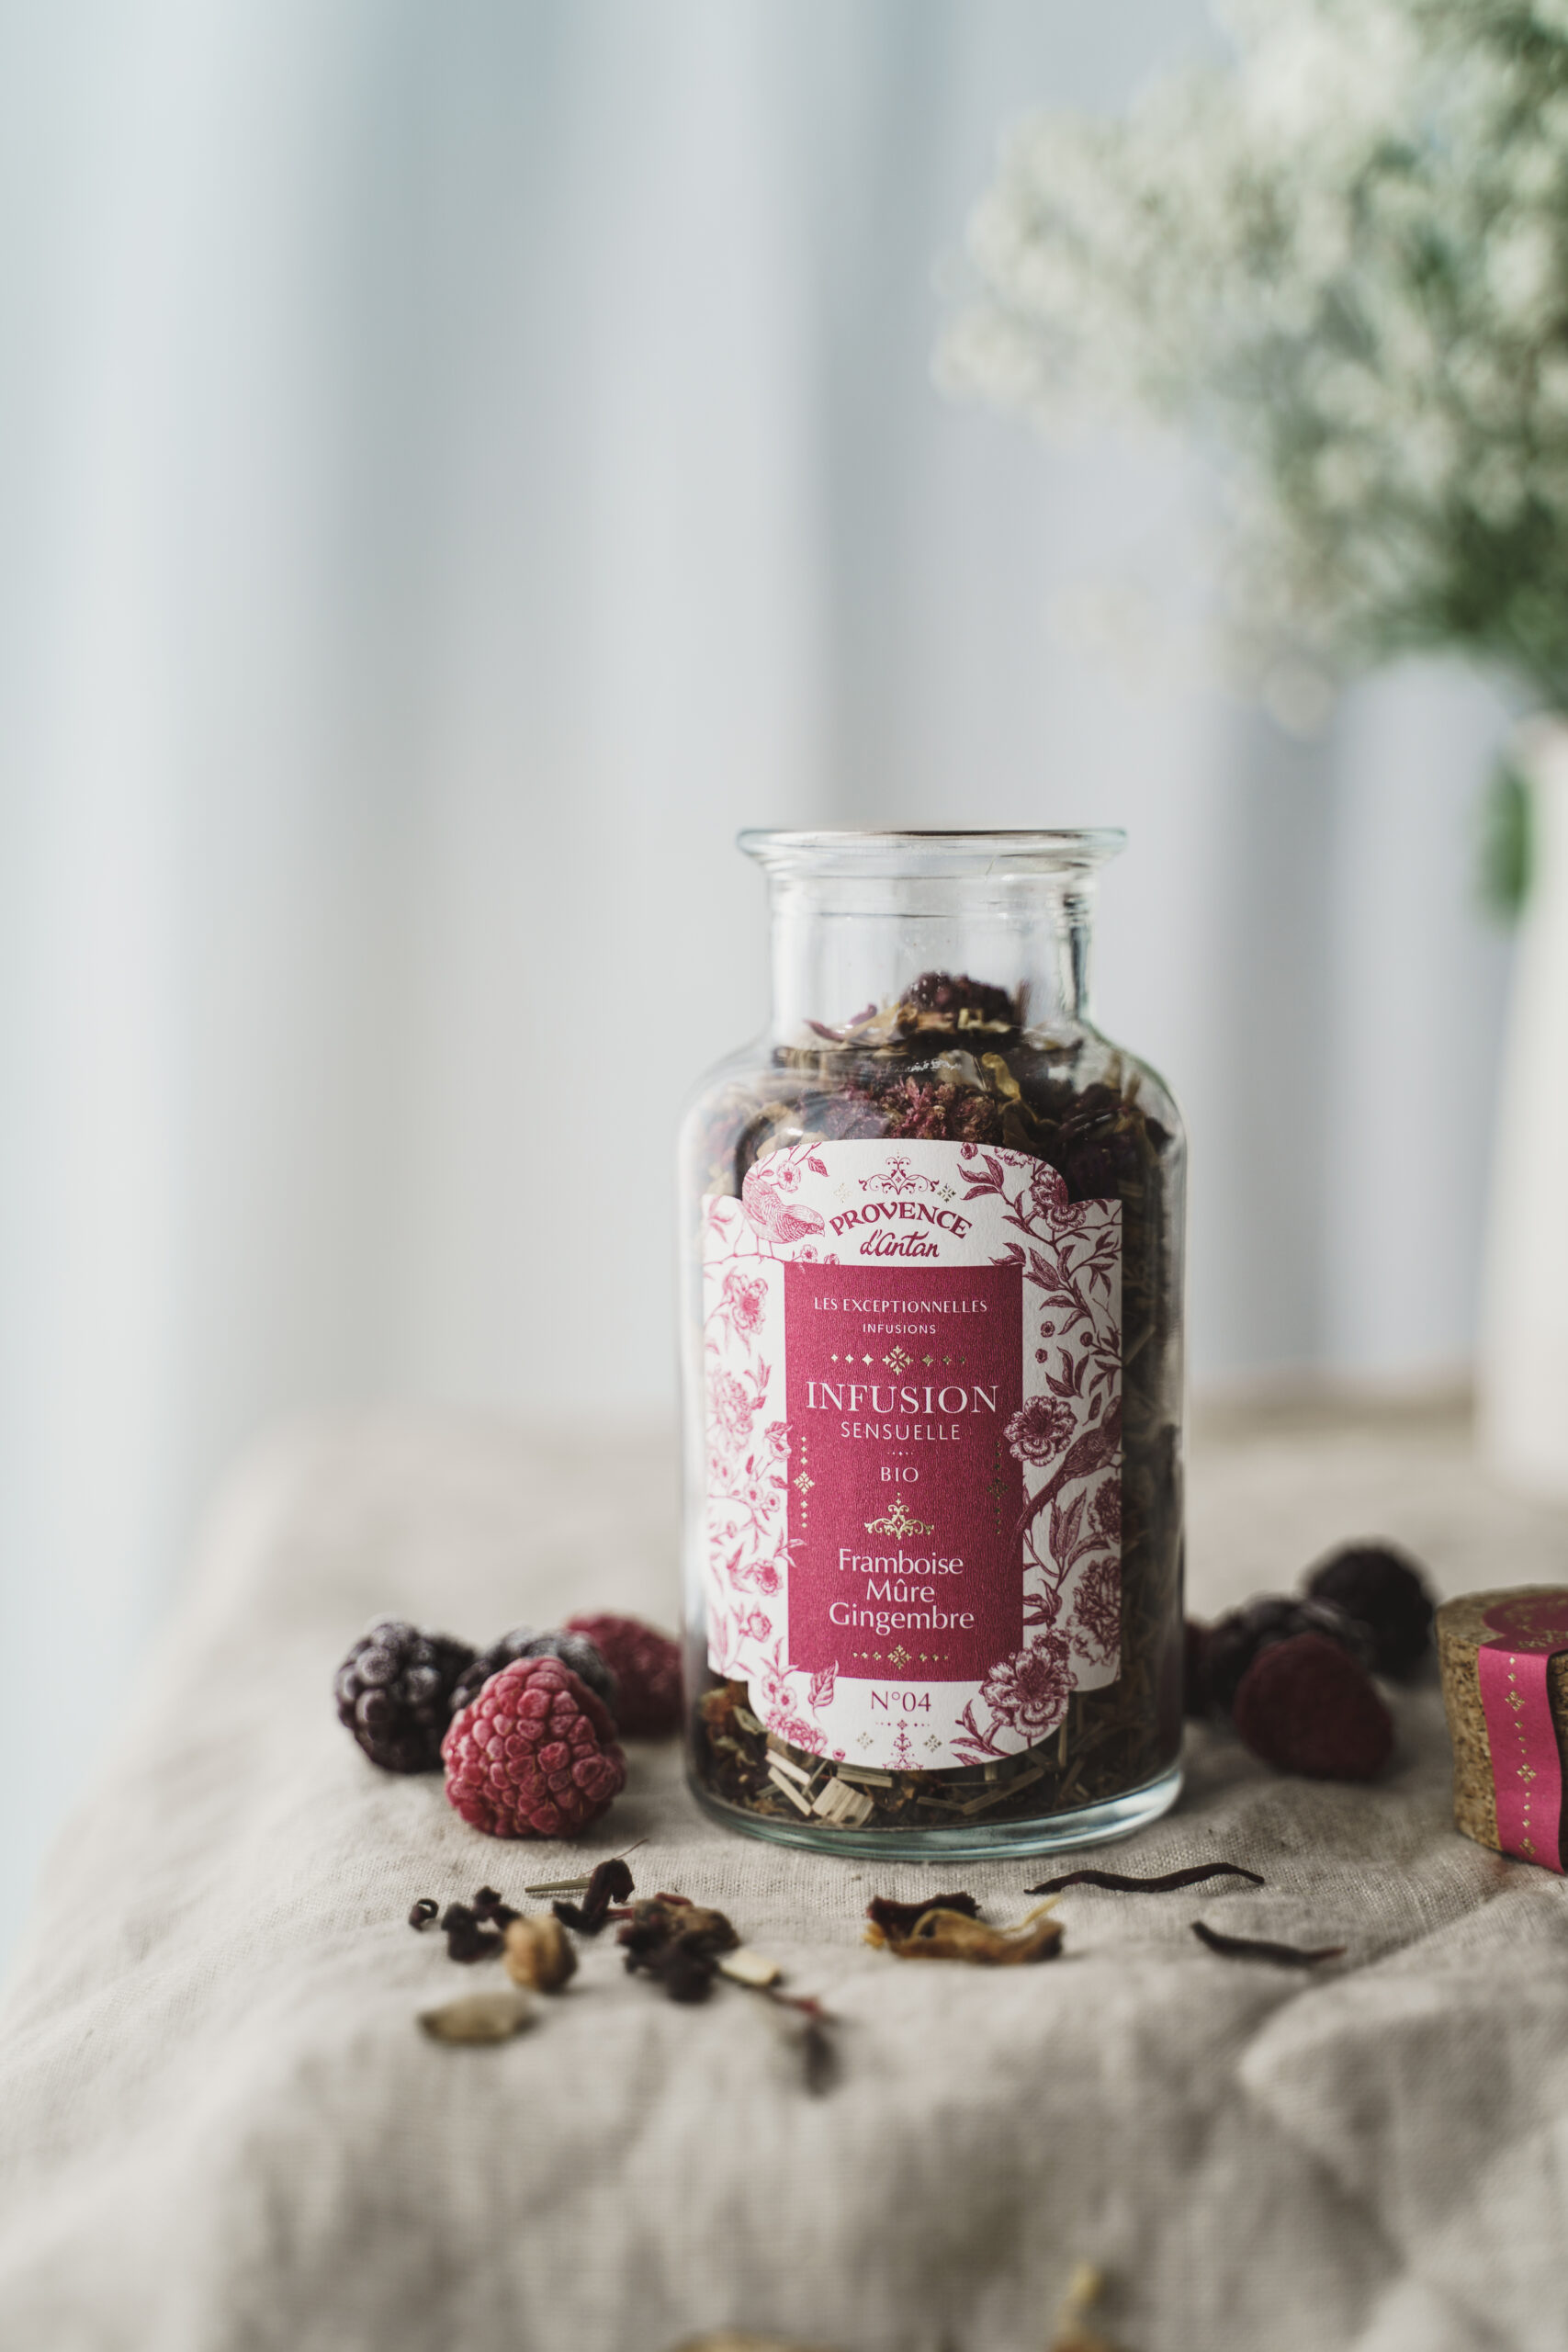 infusion thé fruits rouges framboise mures gingembre provence d'antan